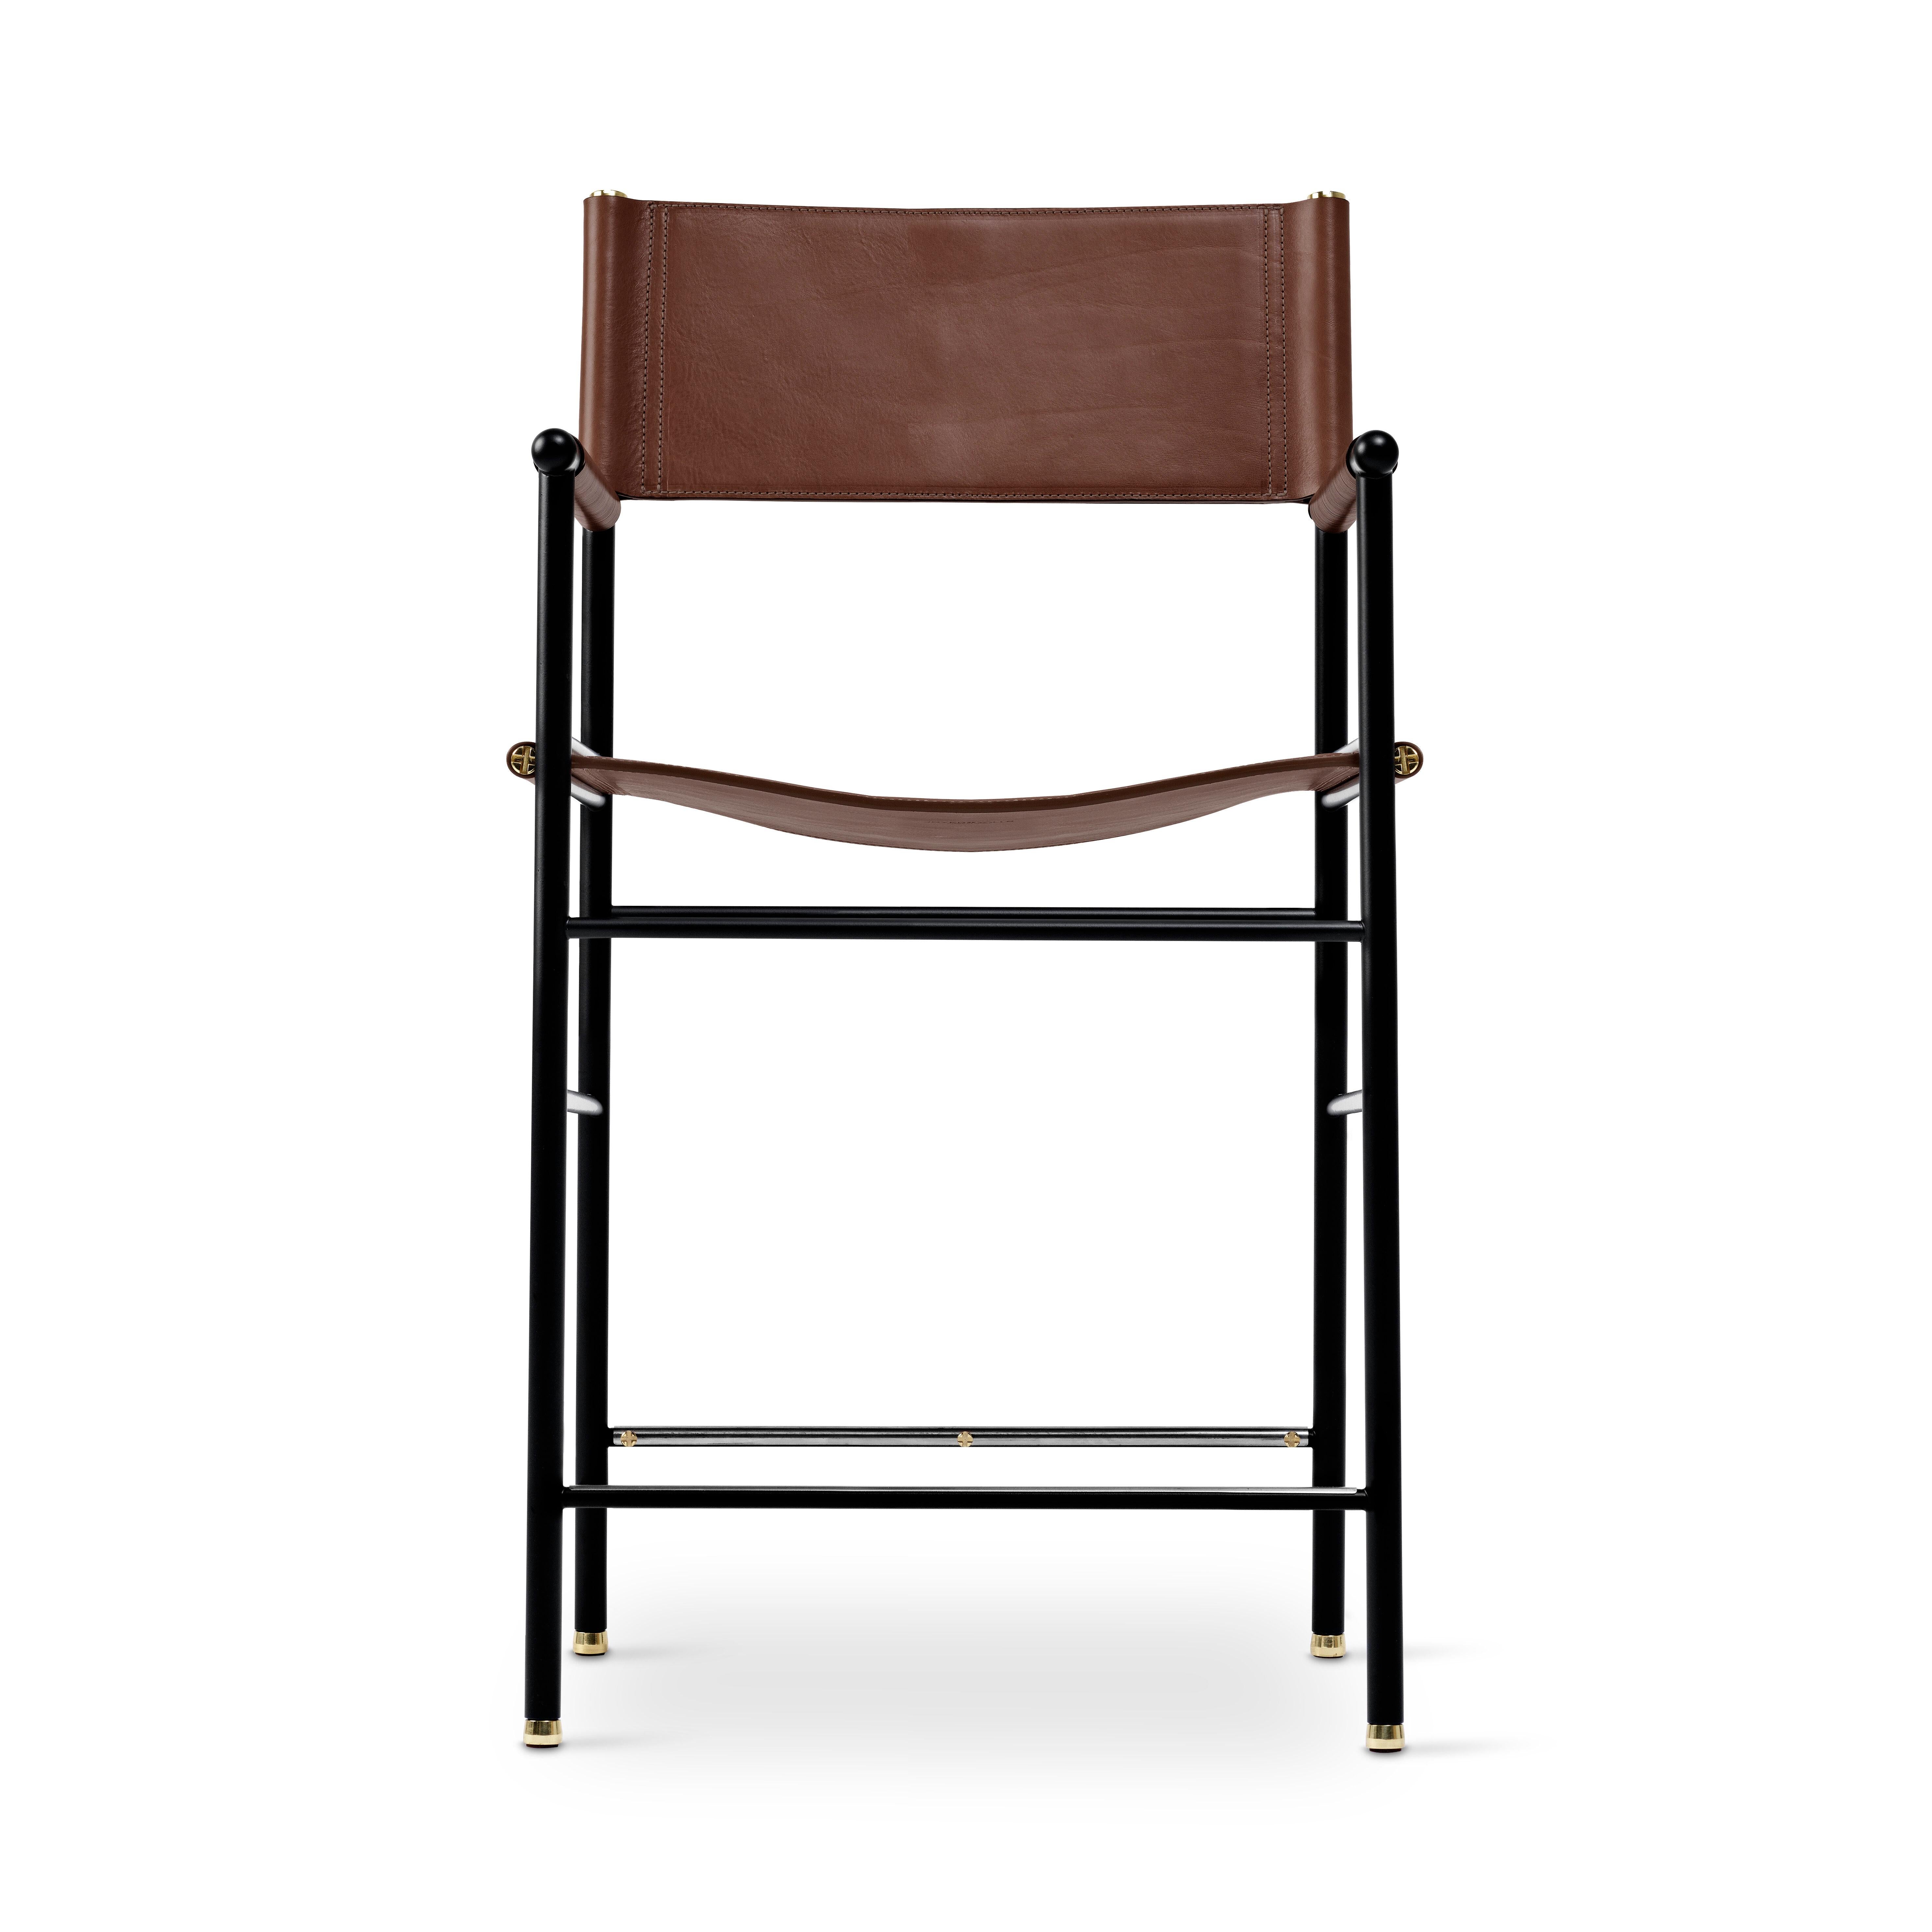 The “Repose” contemporary stool belongs to a collection that revisit the director chair collection, serene pieces where exclusivity and precision are shown in small details such as the hand-turned metal nuts and bolts that fix the leather surfaces,